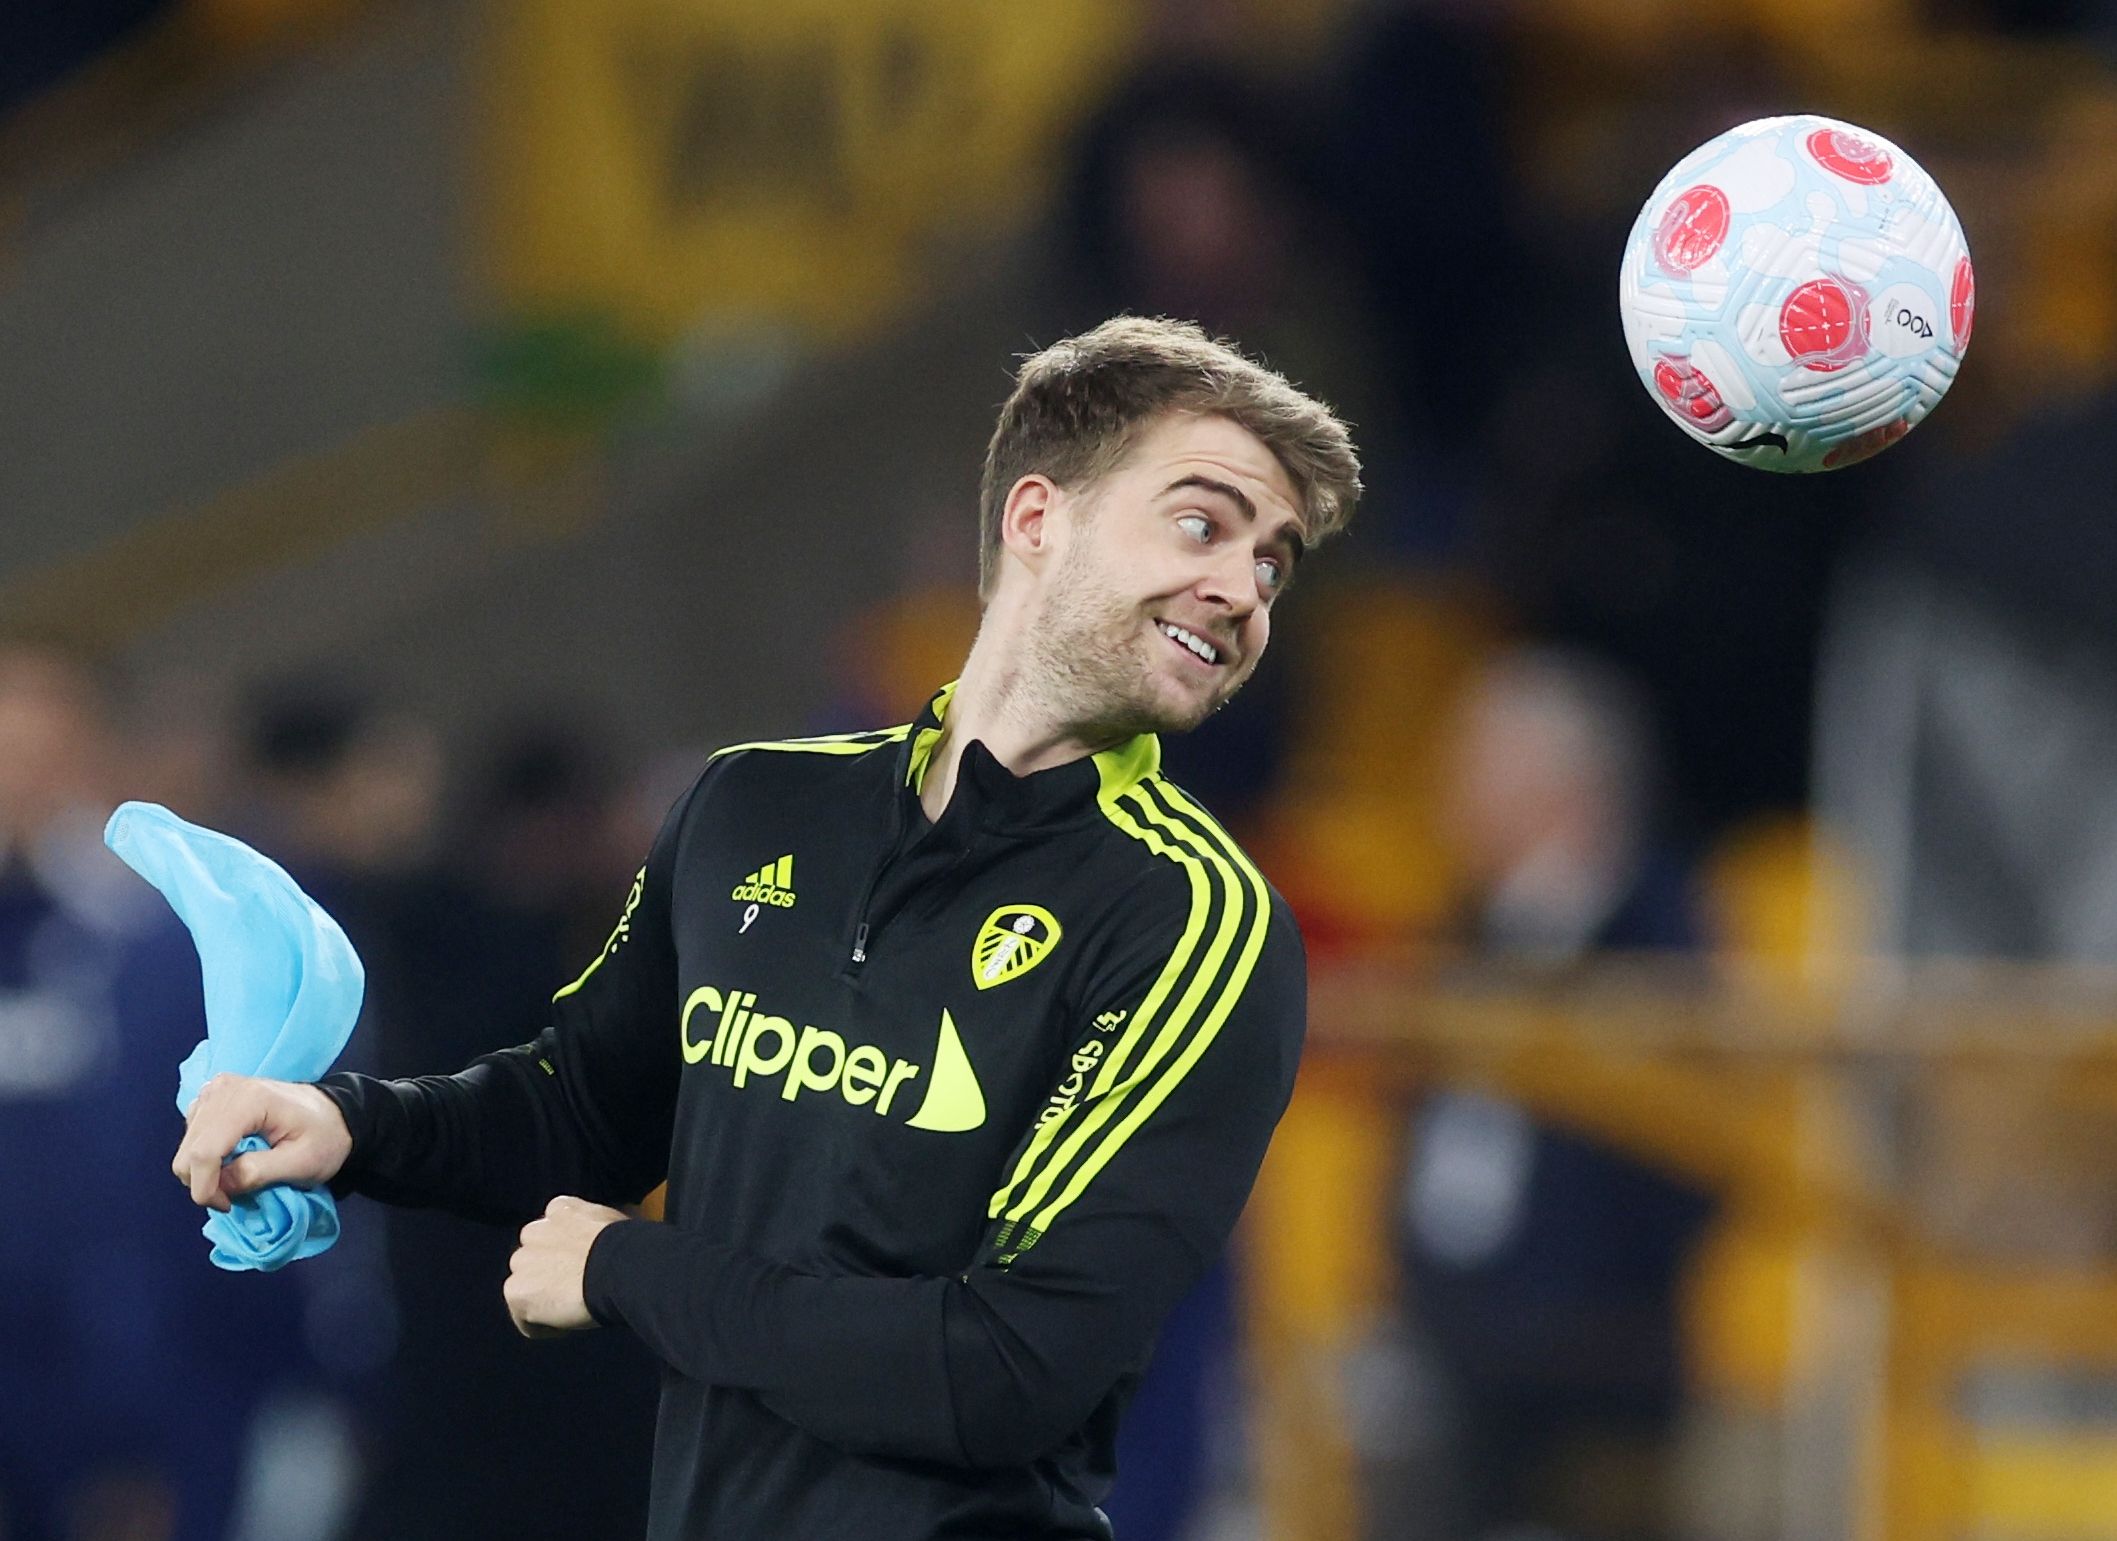 Soccer Football - Premier League - Wolverhampton Wanderers v Leeds United - Molineux Stadium, Wolverhampton, Britain - March 18, 2022 Leeds United's Patrick Bamford during the warm up before the match Action Images via Reuters/Paul Childs EDITORIAL USE ONLY. No use with unauthorized audio, video, data, fixture lists, club/league logos or 'live' services. Online in-match use limited to 75 images, no video emulation. No use in betting, games or single club /league/player publications.  Please cont